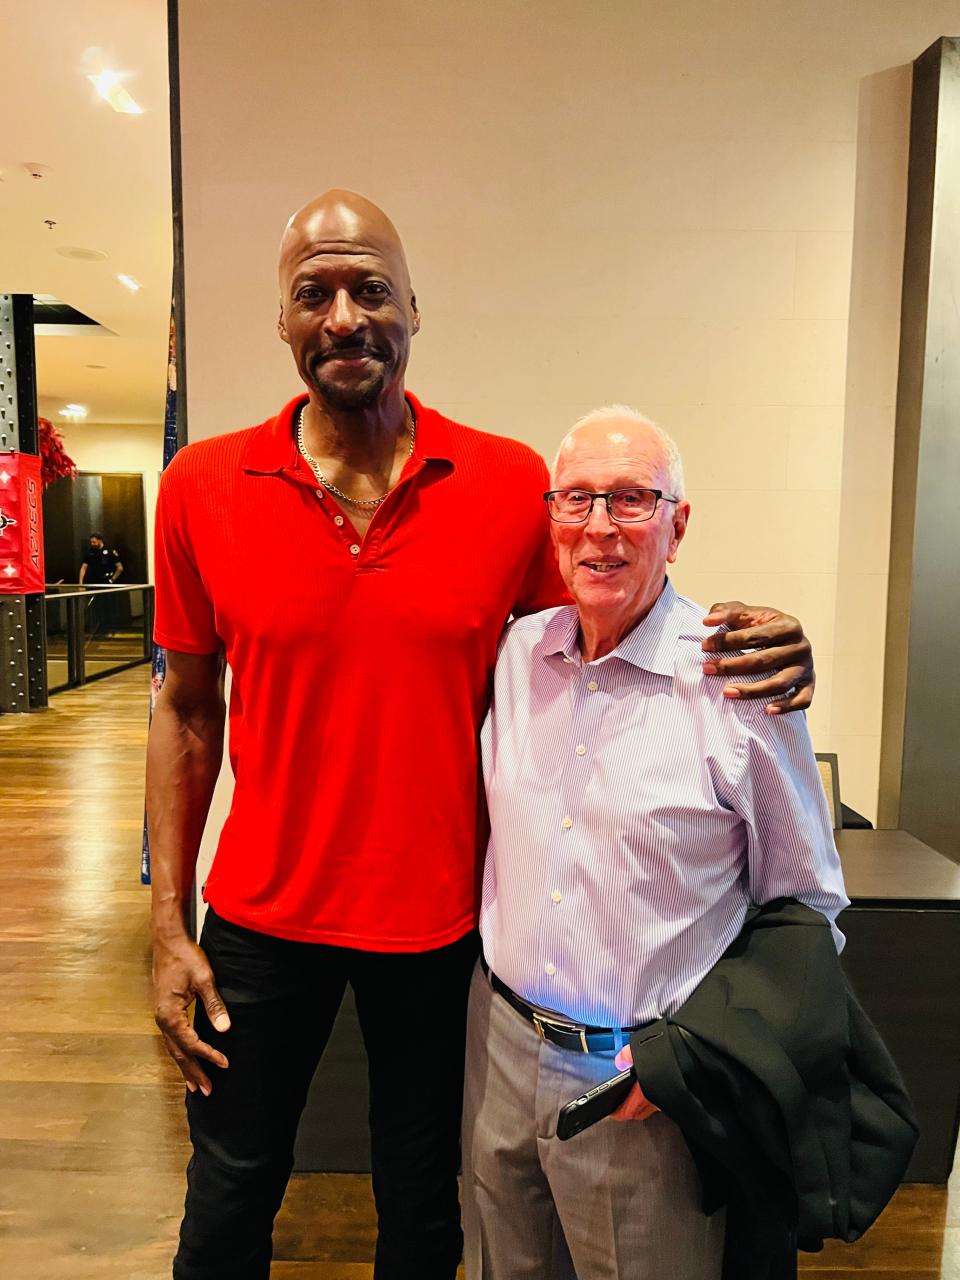 Thunder broadcaster Michael Cage, left, poses for a photo with former San Diego State head coach Steve Fisher in Houston.